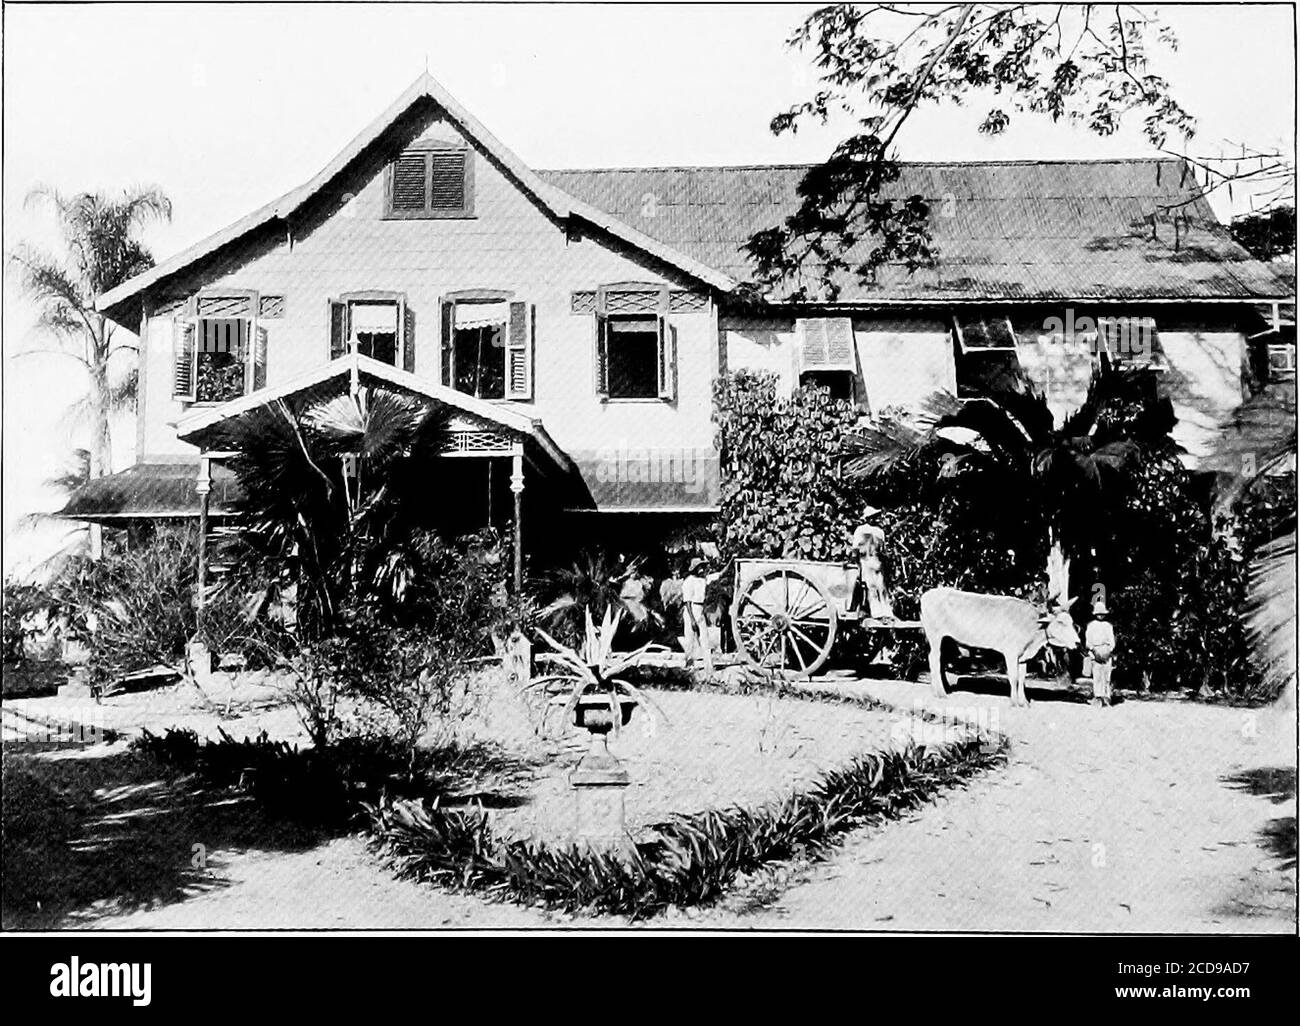 . Life and adventure in the West Indies; a sequel to Adventures in search of a living in Spanish-America . Rubber (to the left), Coco-nuts (in centre) and Cocoa (to the right) onSt. Marie Estate.. House of St. Marie Estate. IN TRINIDAD 243 of a new industry which as yet had brought in no return. Thephotograph taken illustrates the three principal agricultural productsof the estate. To the left are the rubber trees, in the centre somecoco-nut palms can be seen in the distance, while to the right of thegrassy road is a cocoa plantation where the trees are scarcely shadedby the almost leafless bo Stock Photo